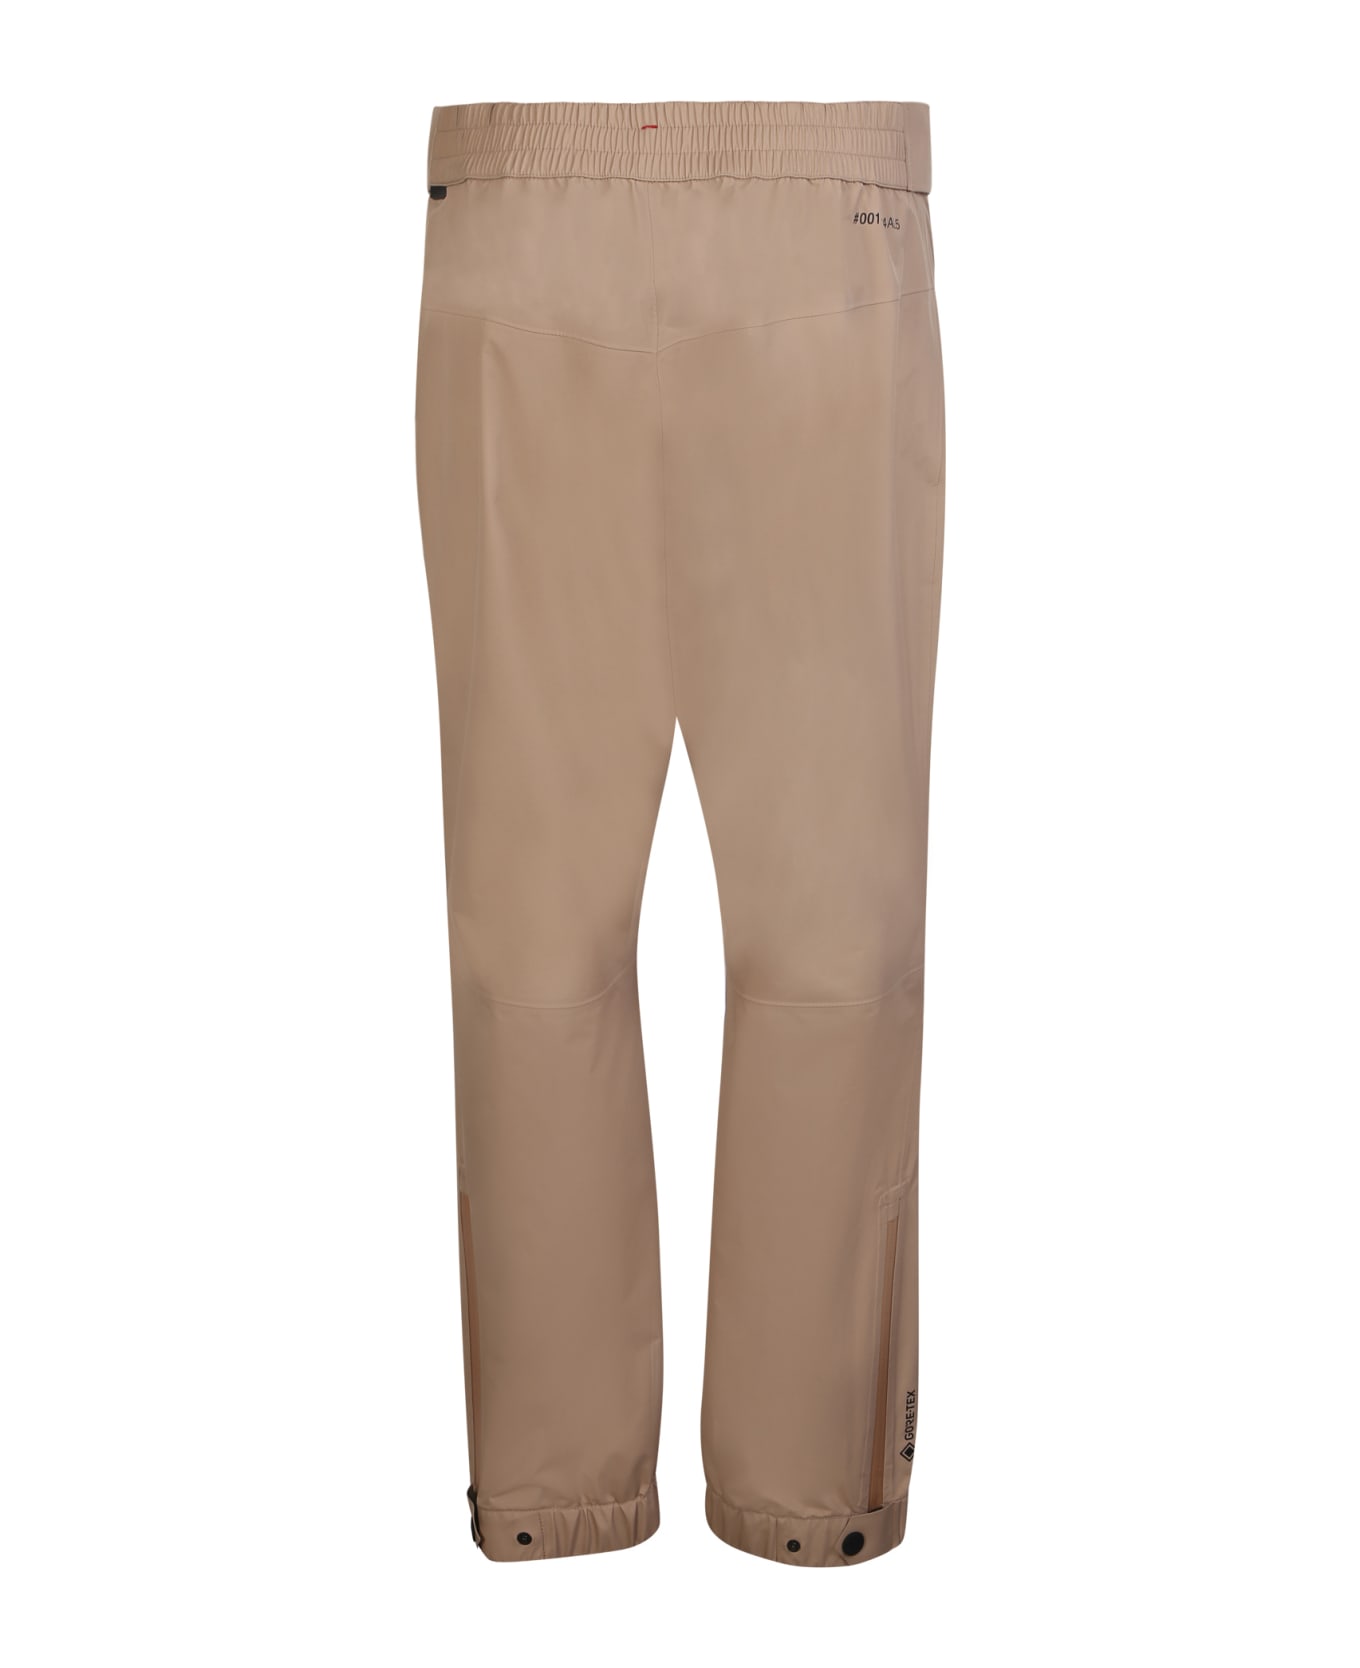 Moncler Grenoble Day-namic Shell Beige Trousers - Beige ボトムス